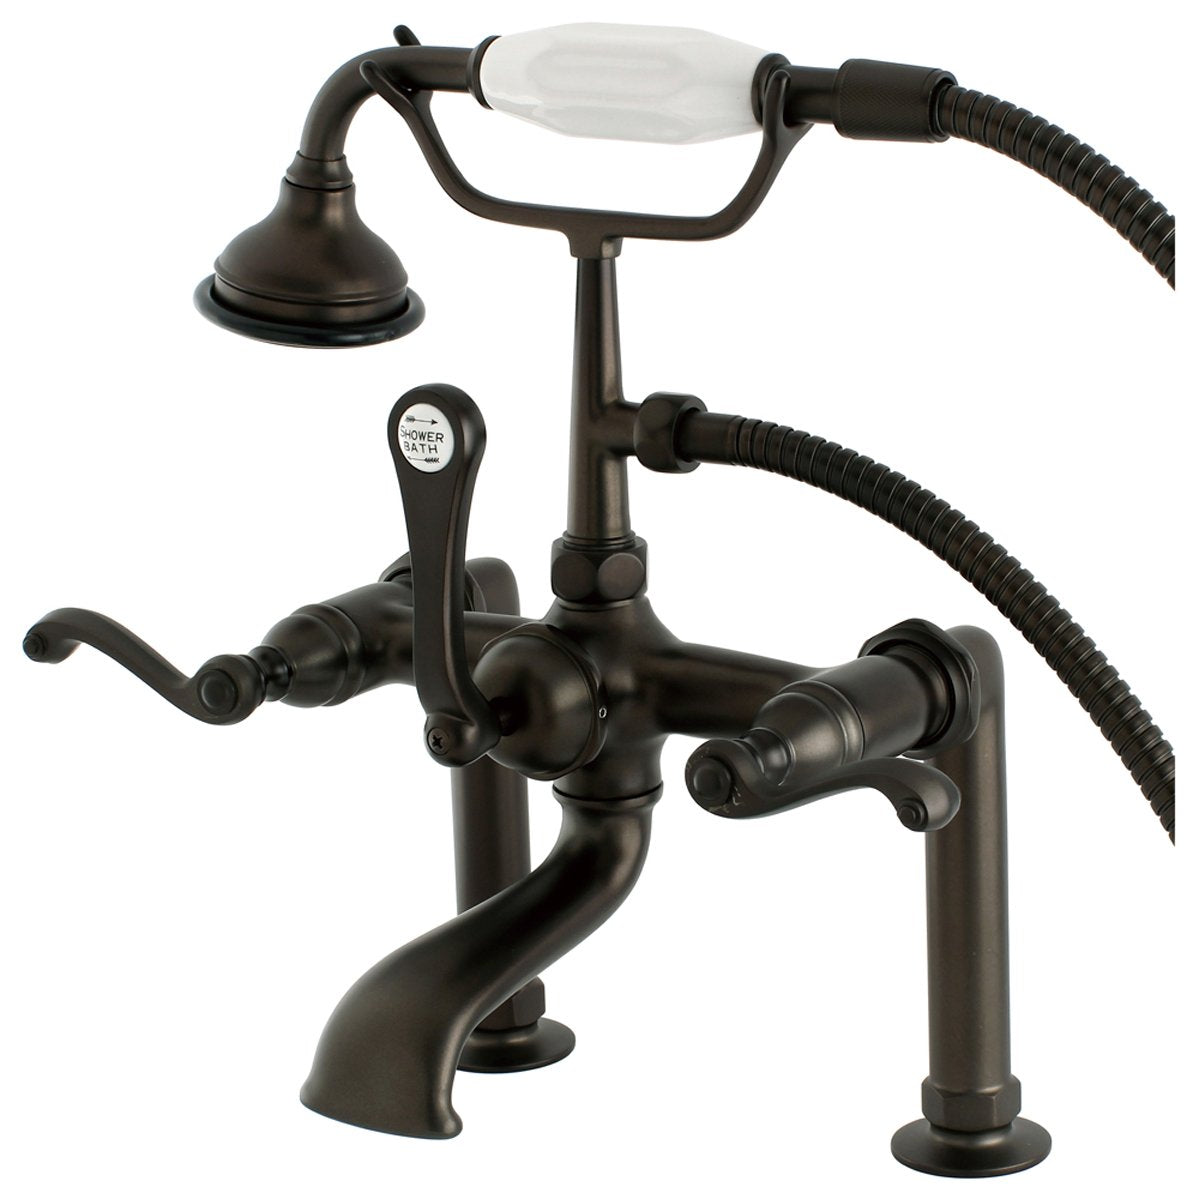 Kingston Brass Aqua Eden AE103T5FL Royale Deck Mount Clawfoot Tub Faucet in Oil Rubbed Bronze-Tub Faucets-Free Shipping-Directsinks.